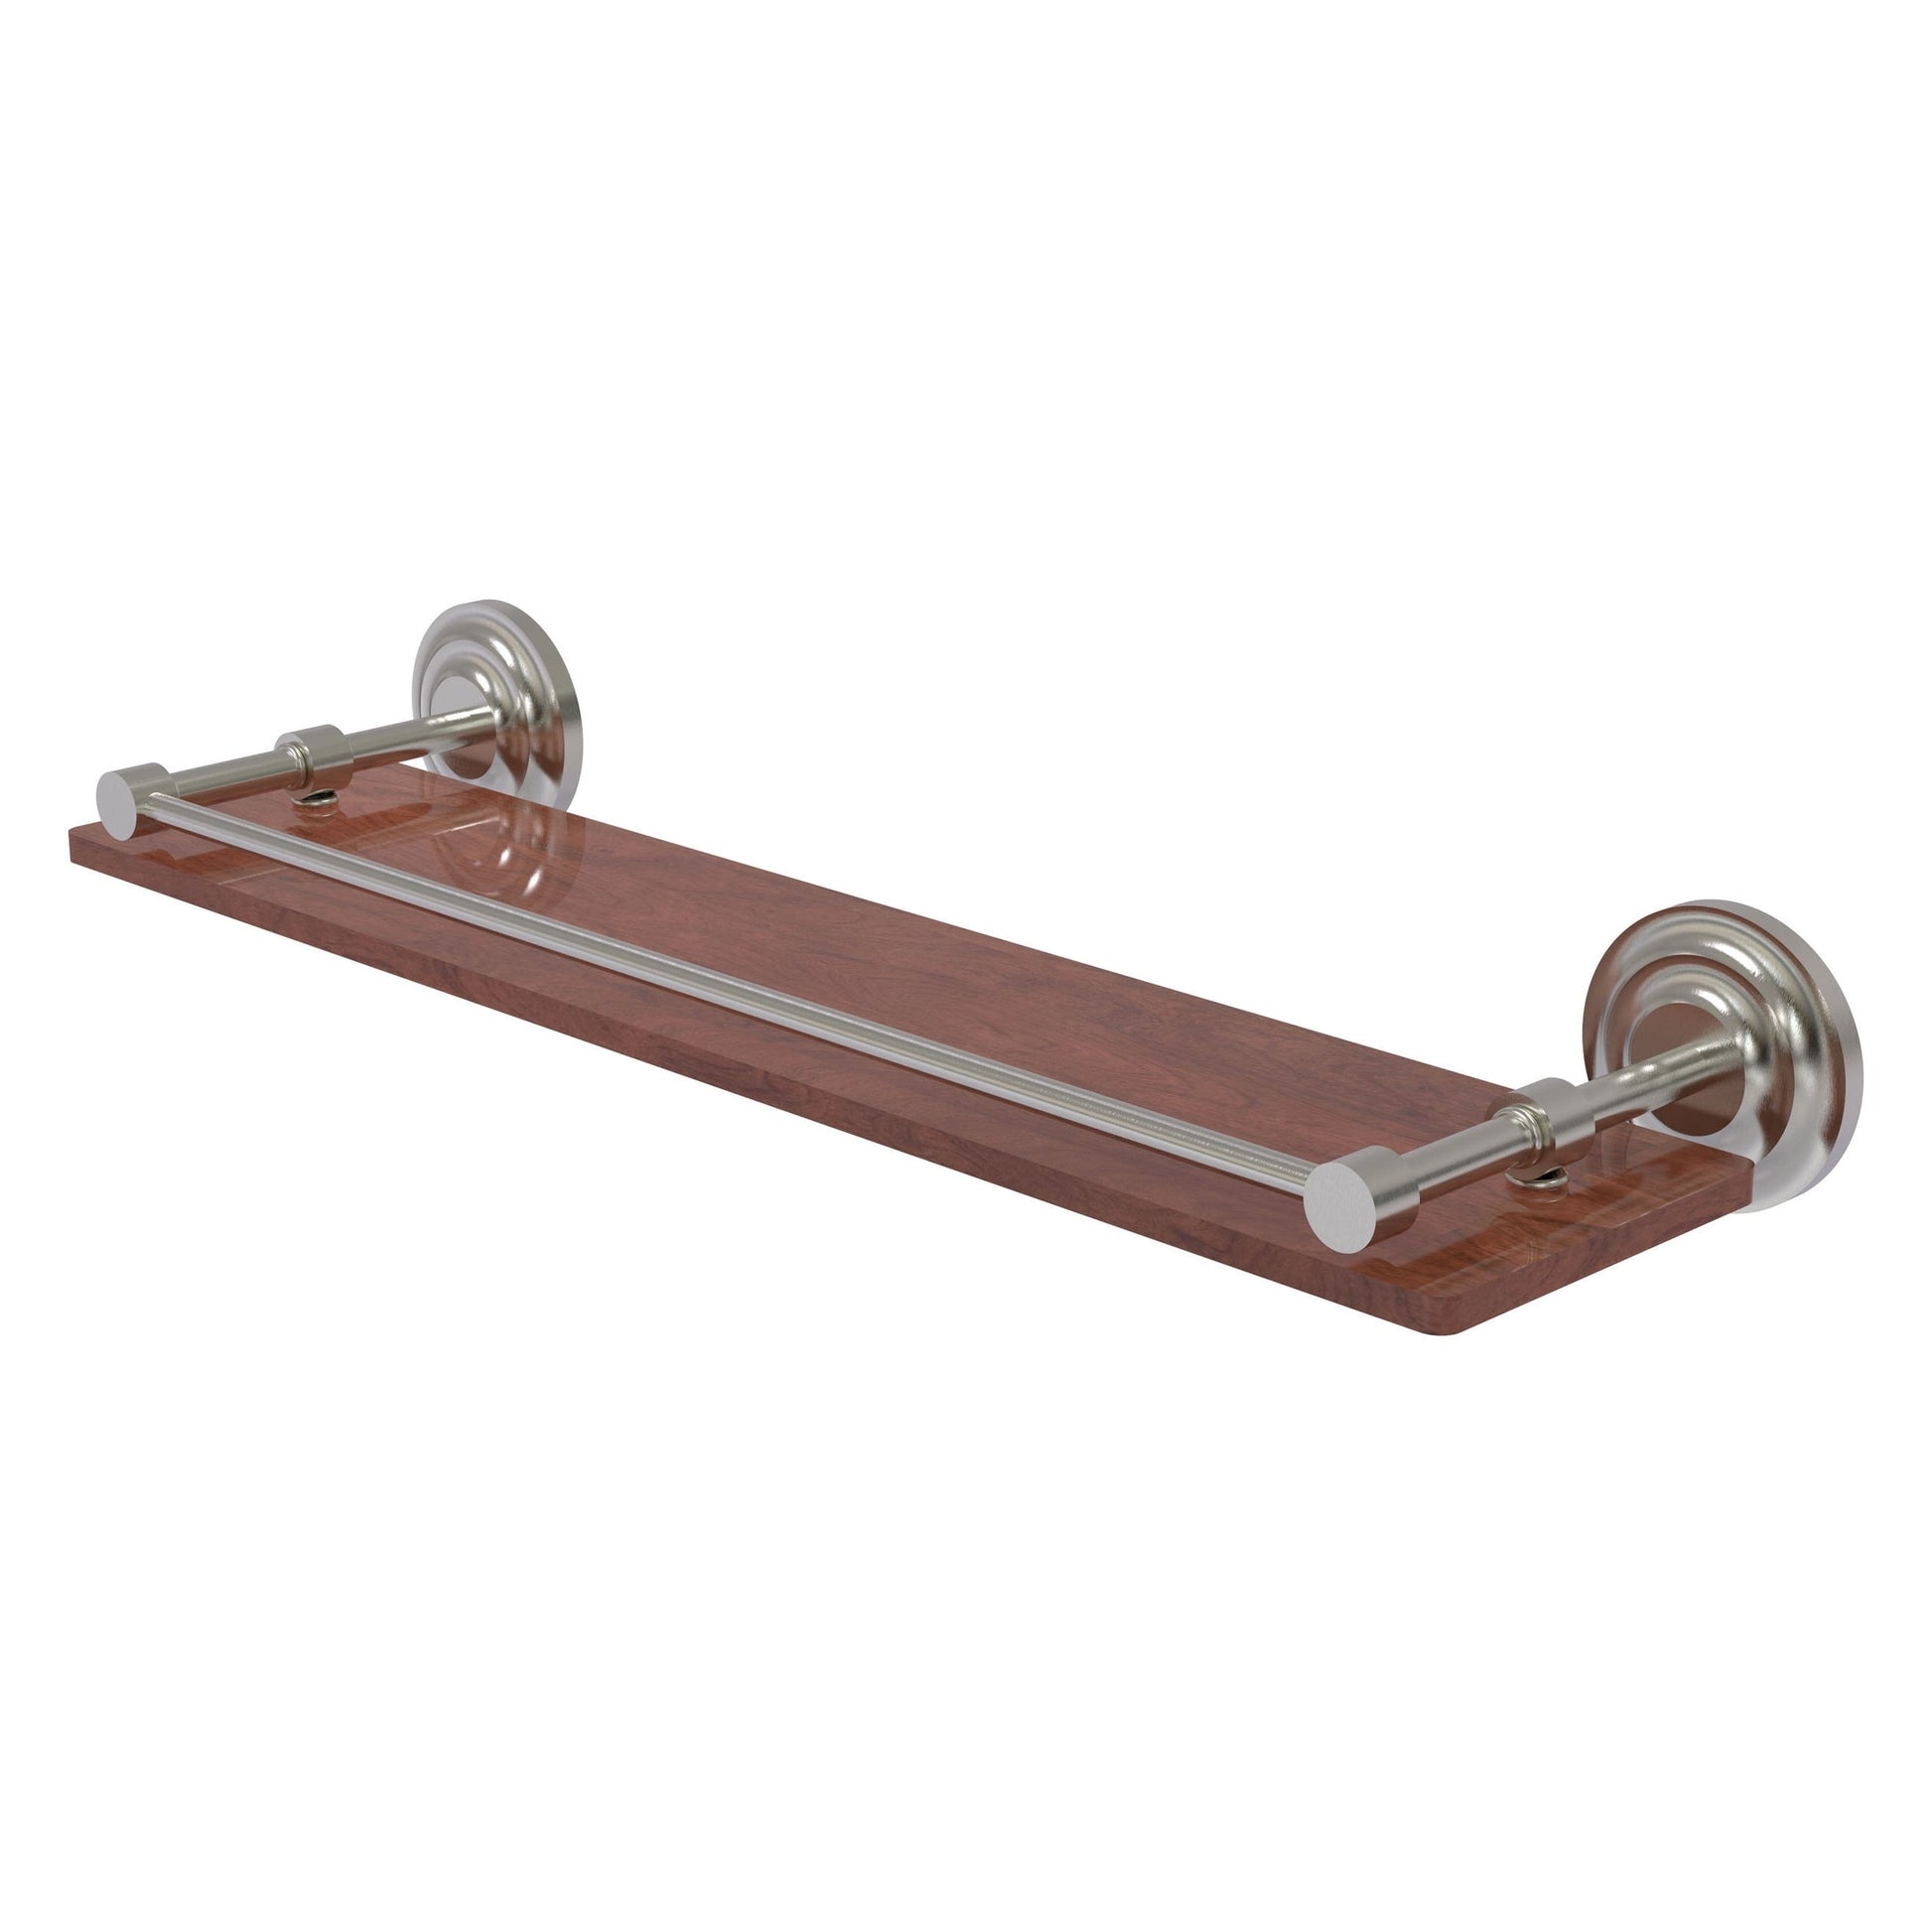 Allied Brass Que New 22" x 5" Satin Nickel Solid Brass 22-Inch Solid IPE Ironwood Shelf With Gallery Rail